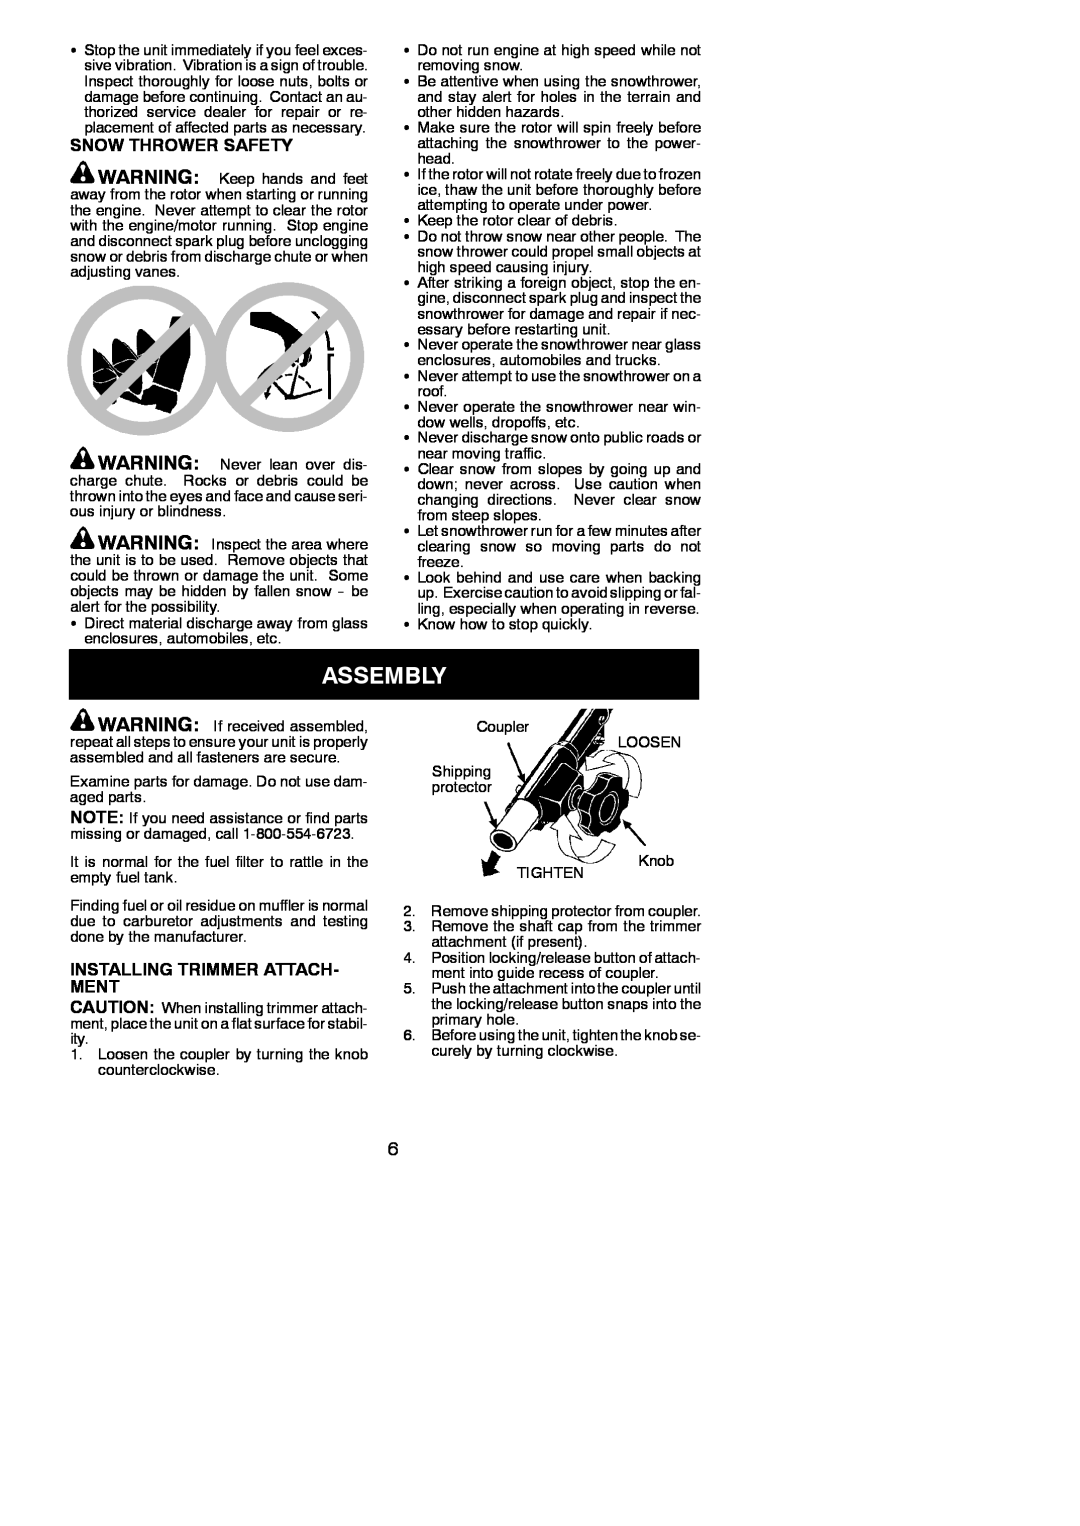 Poulan 545137276 instruction manual Assembly, Snow Thrower Safety, Installing Trimmer Attach- Ment 